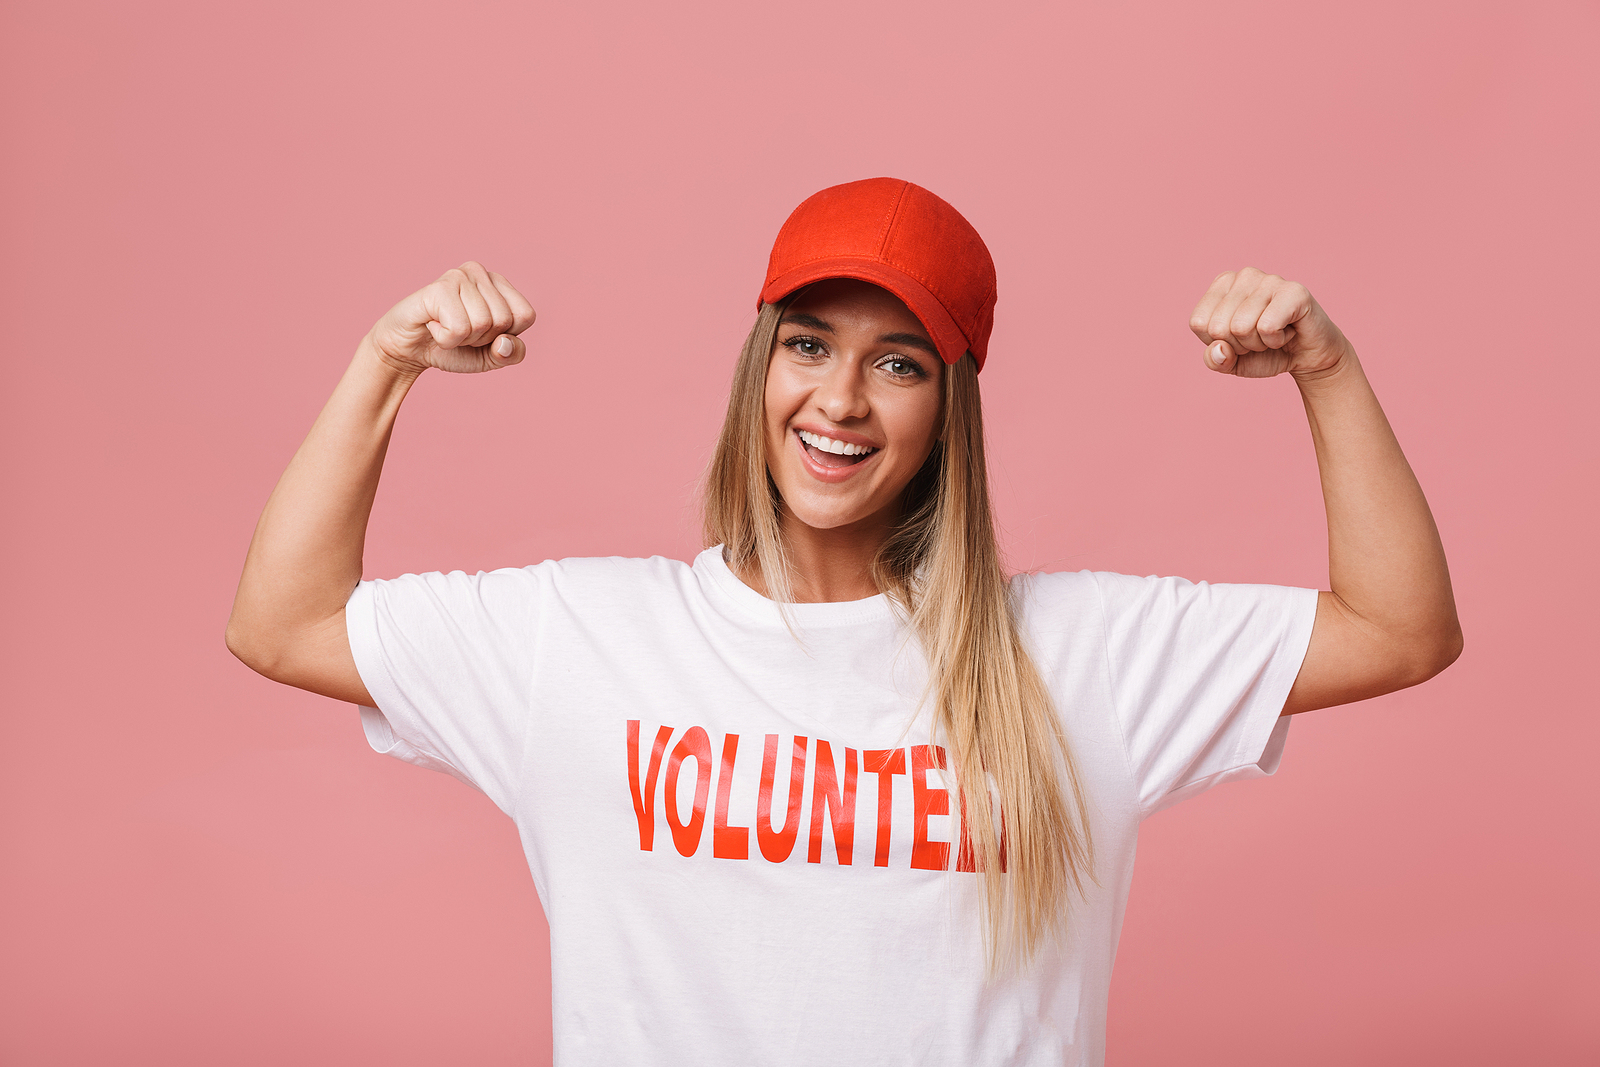 A blond haired woman wearing a shirt that reads volunteer flexes her arms and smiles.